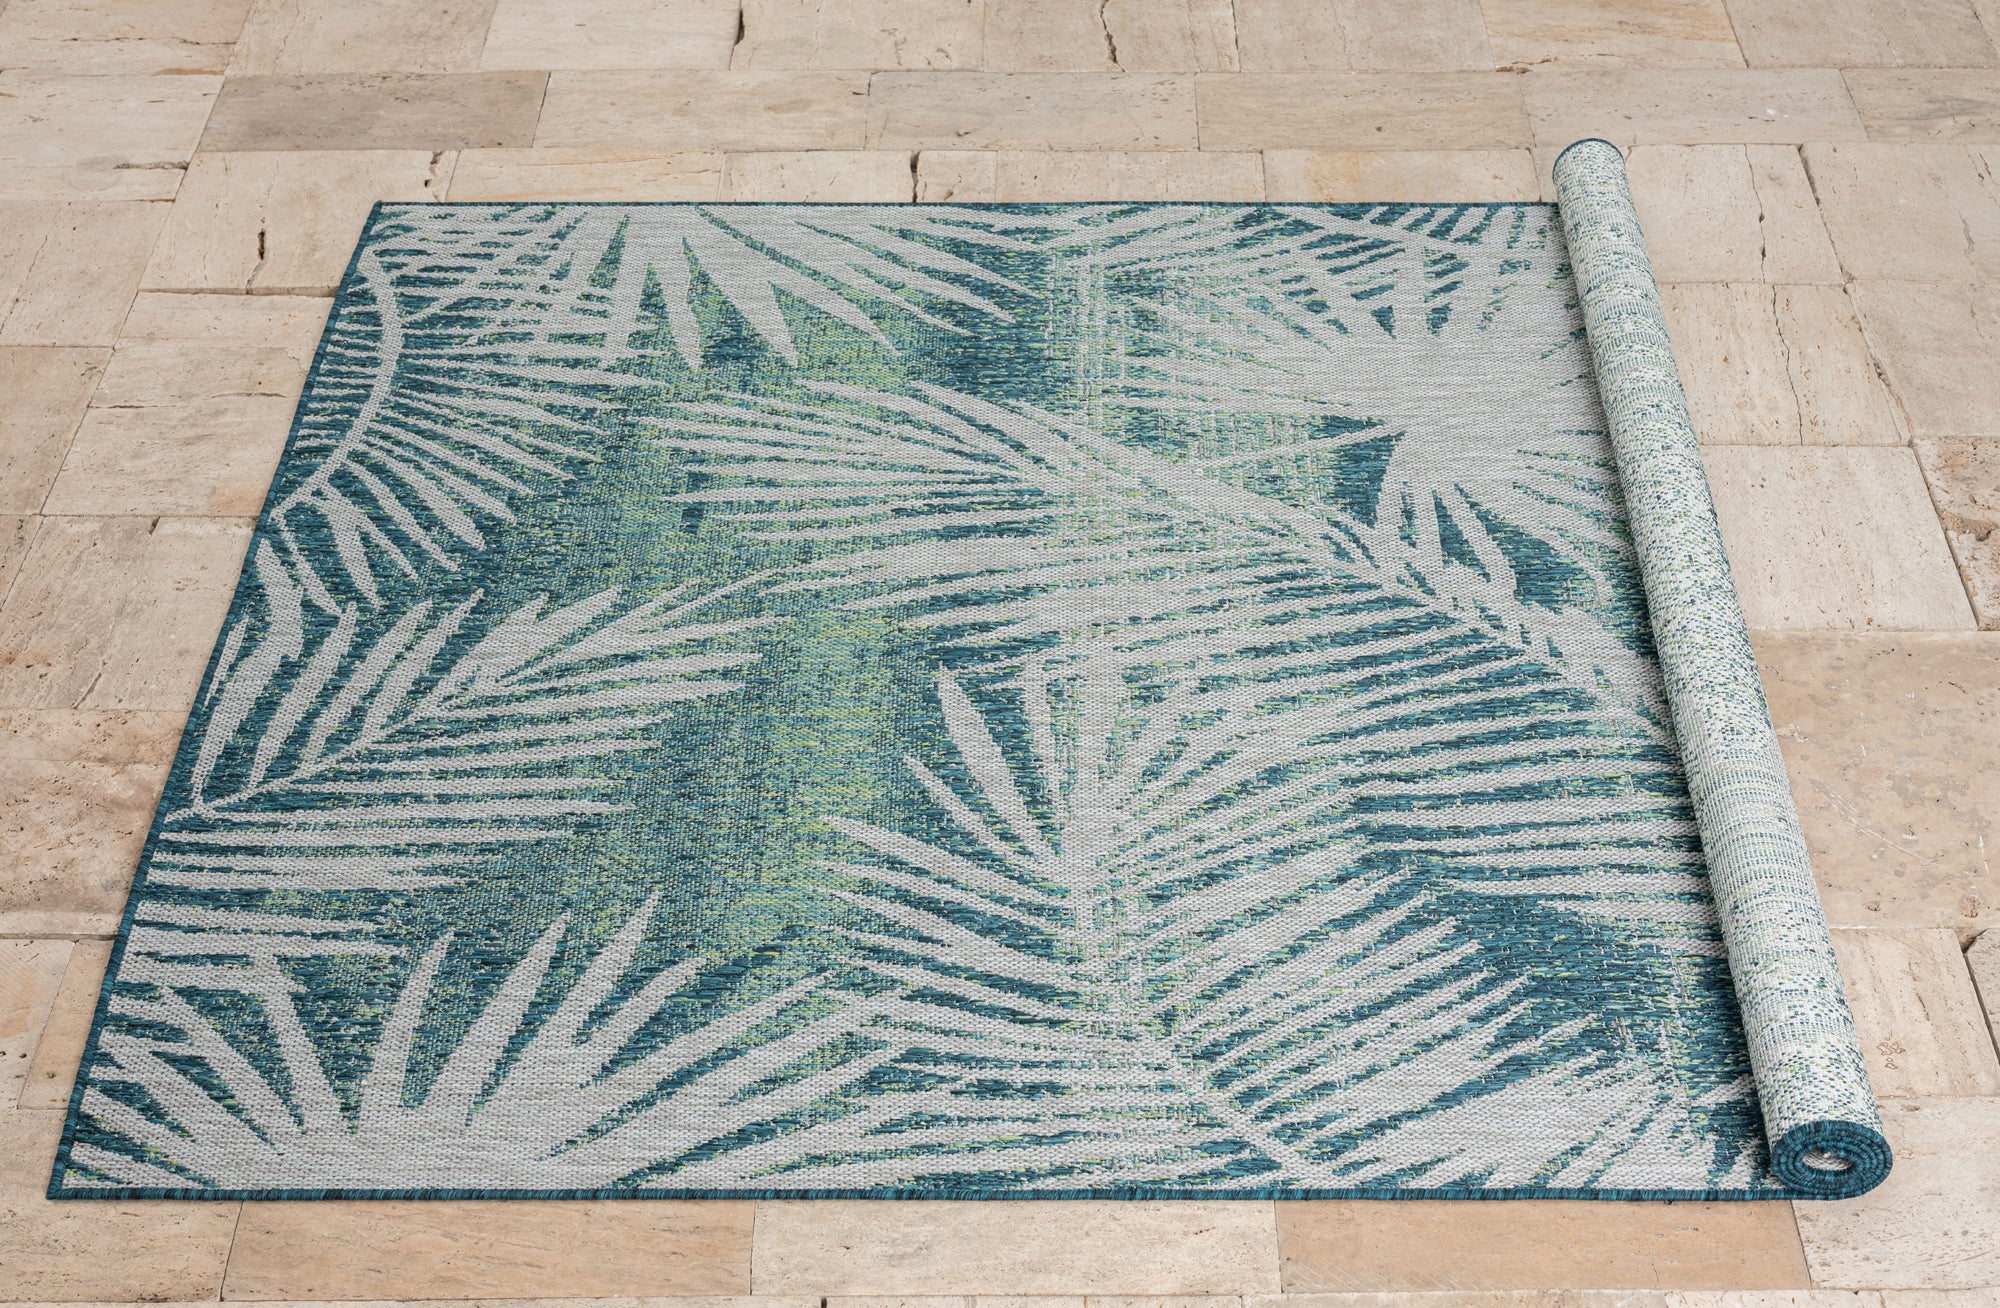 American cover design / Persian weavers Coastal 662 Forest Rug